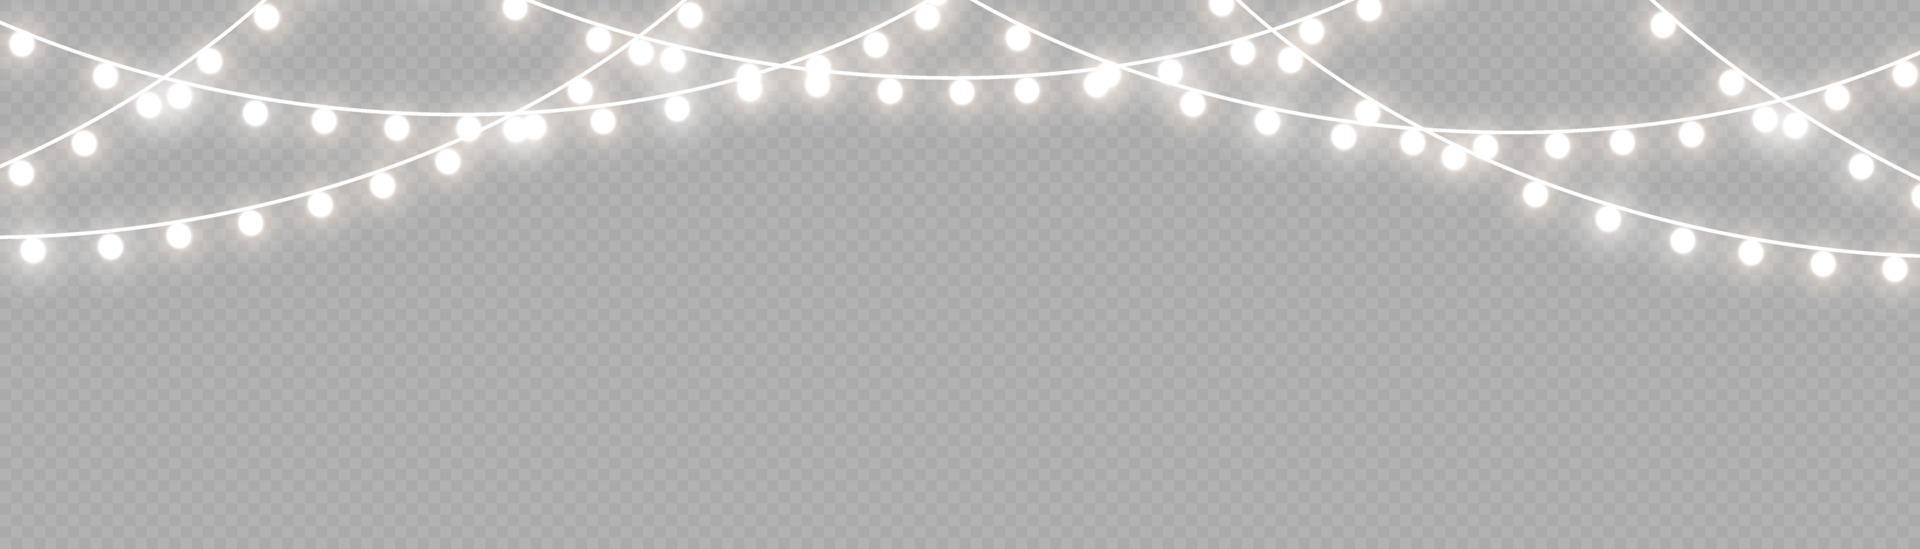 Light effect. Vector illustration. Christmas lights isolated. Christmas glowing garland. For the new year and christmas.